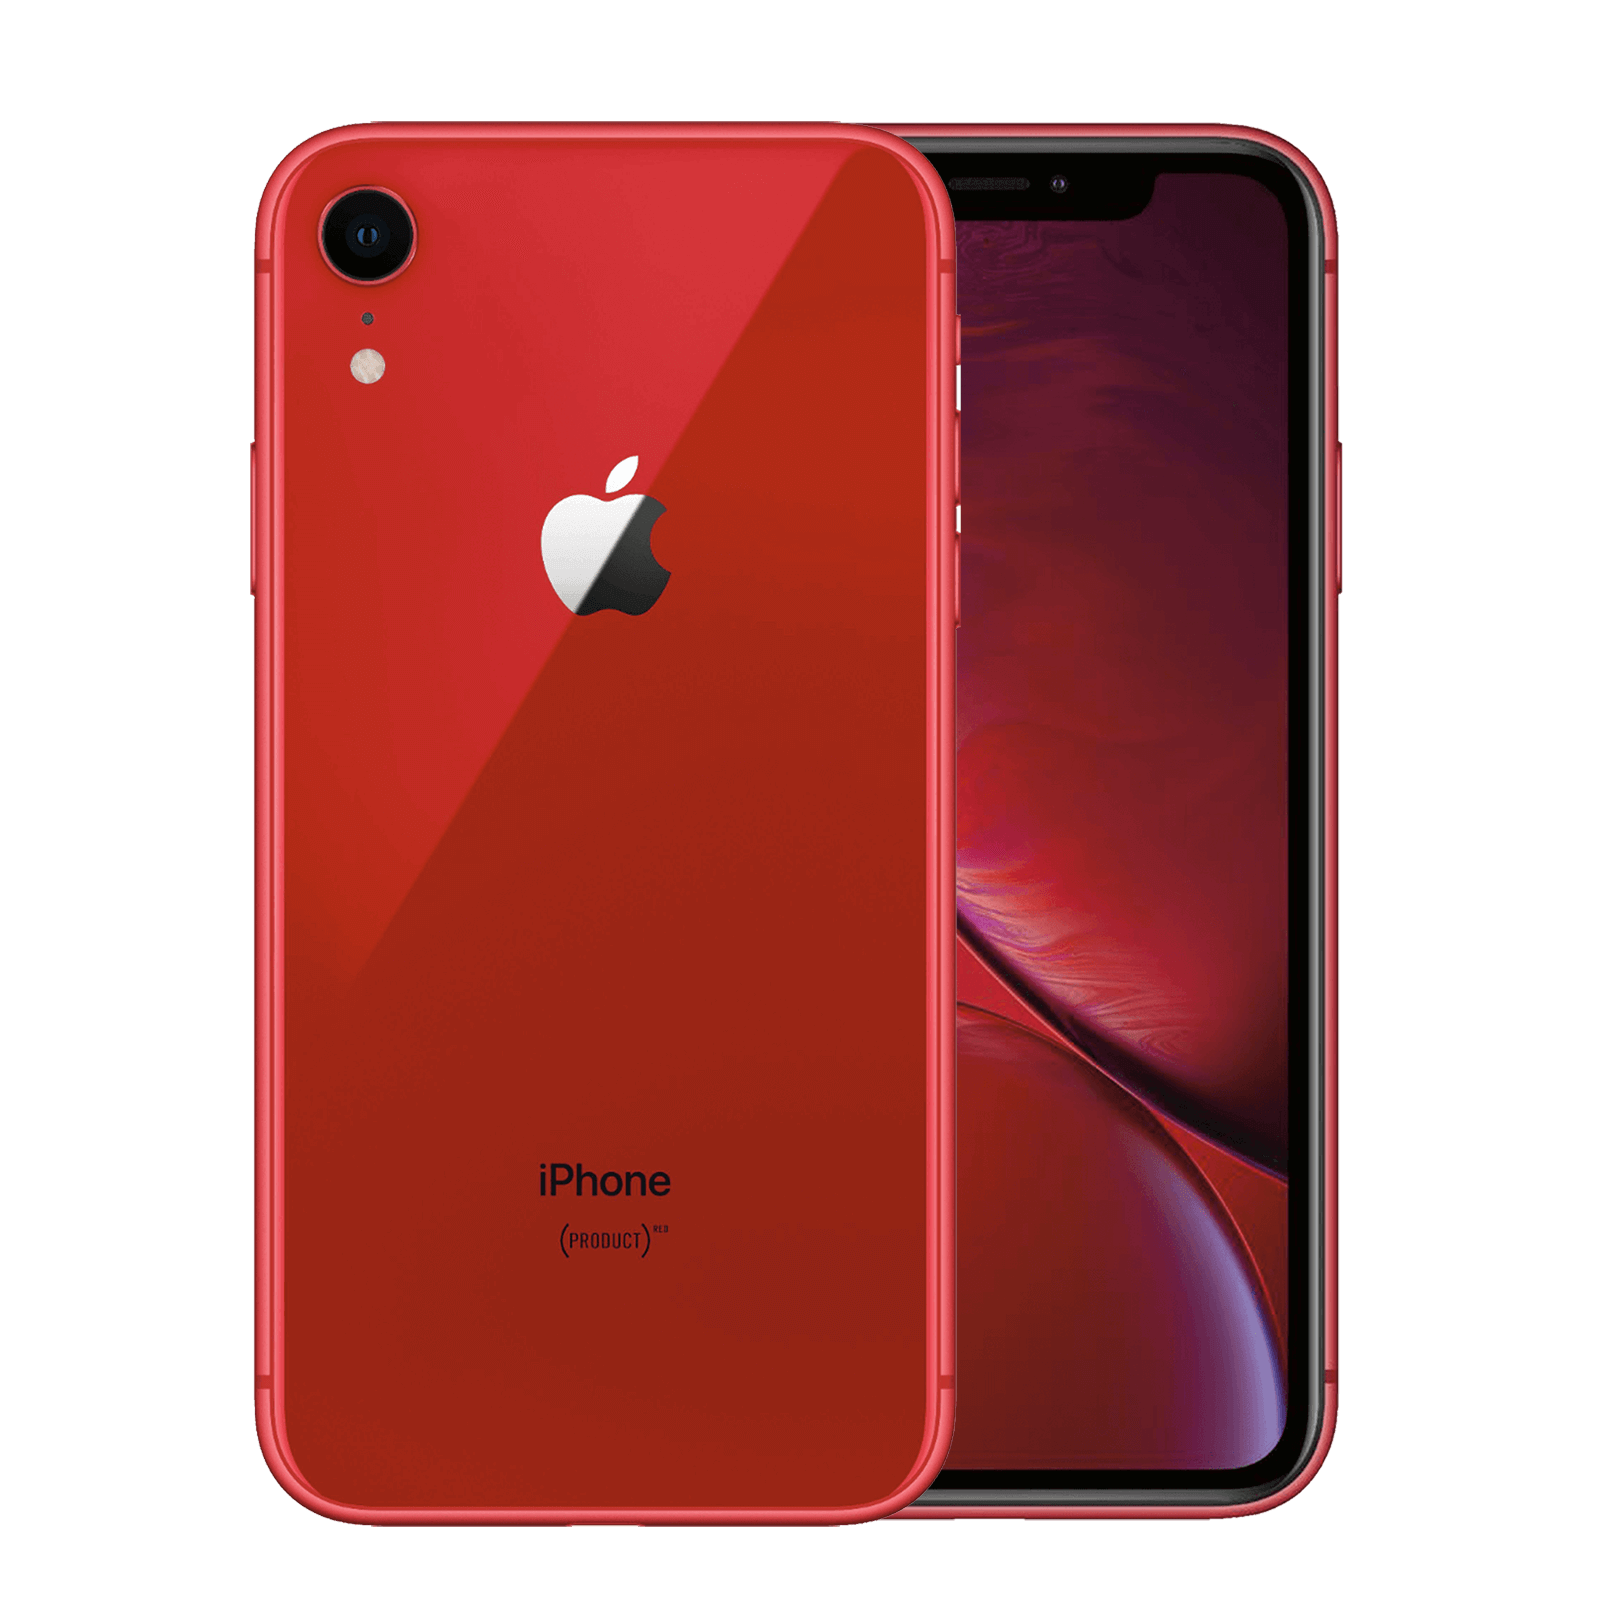 Apple iPhone XR 128GB Product Red Good - AT&T